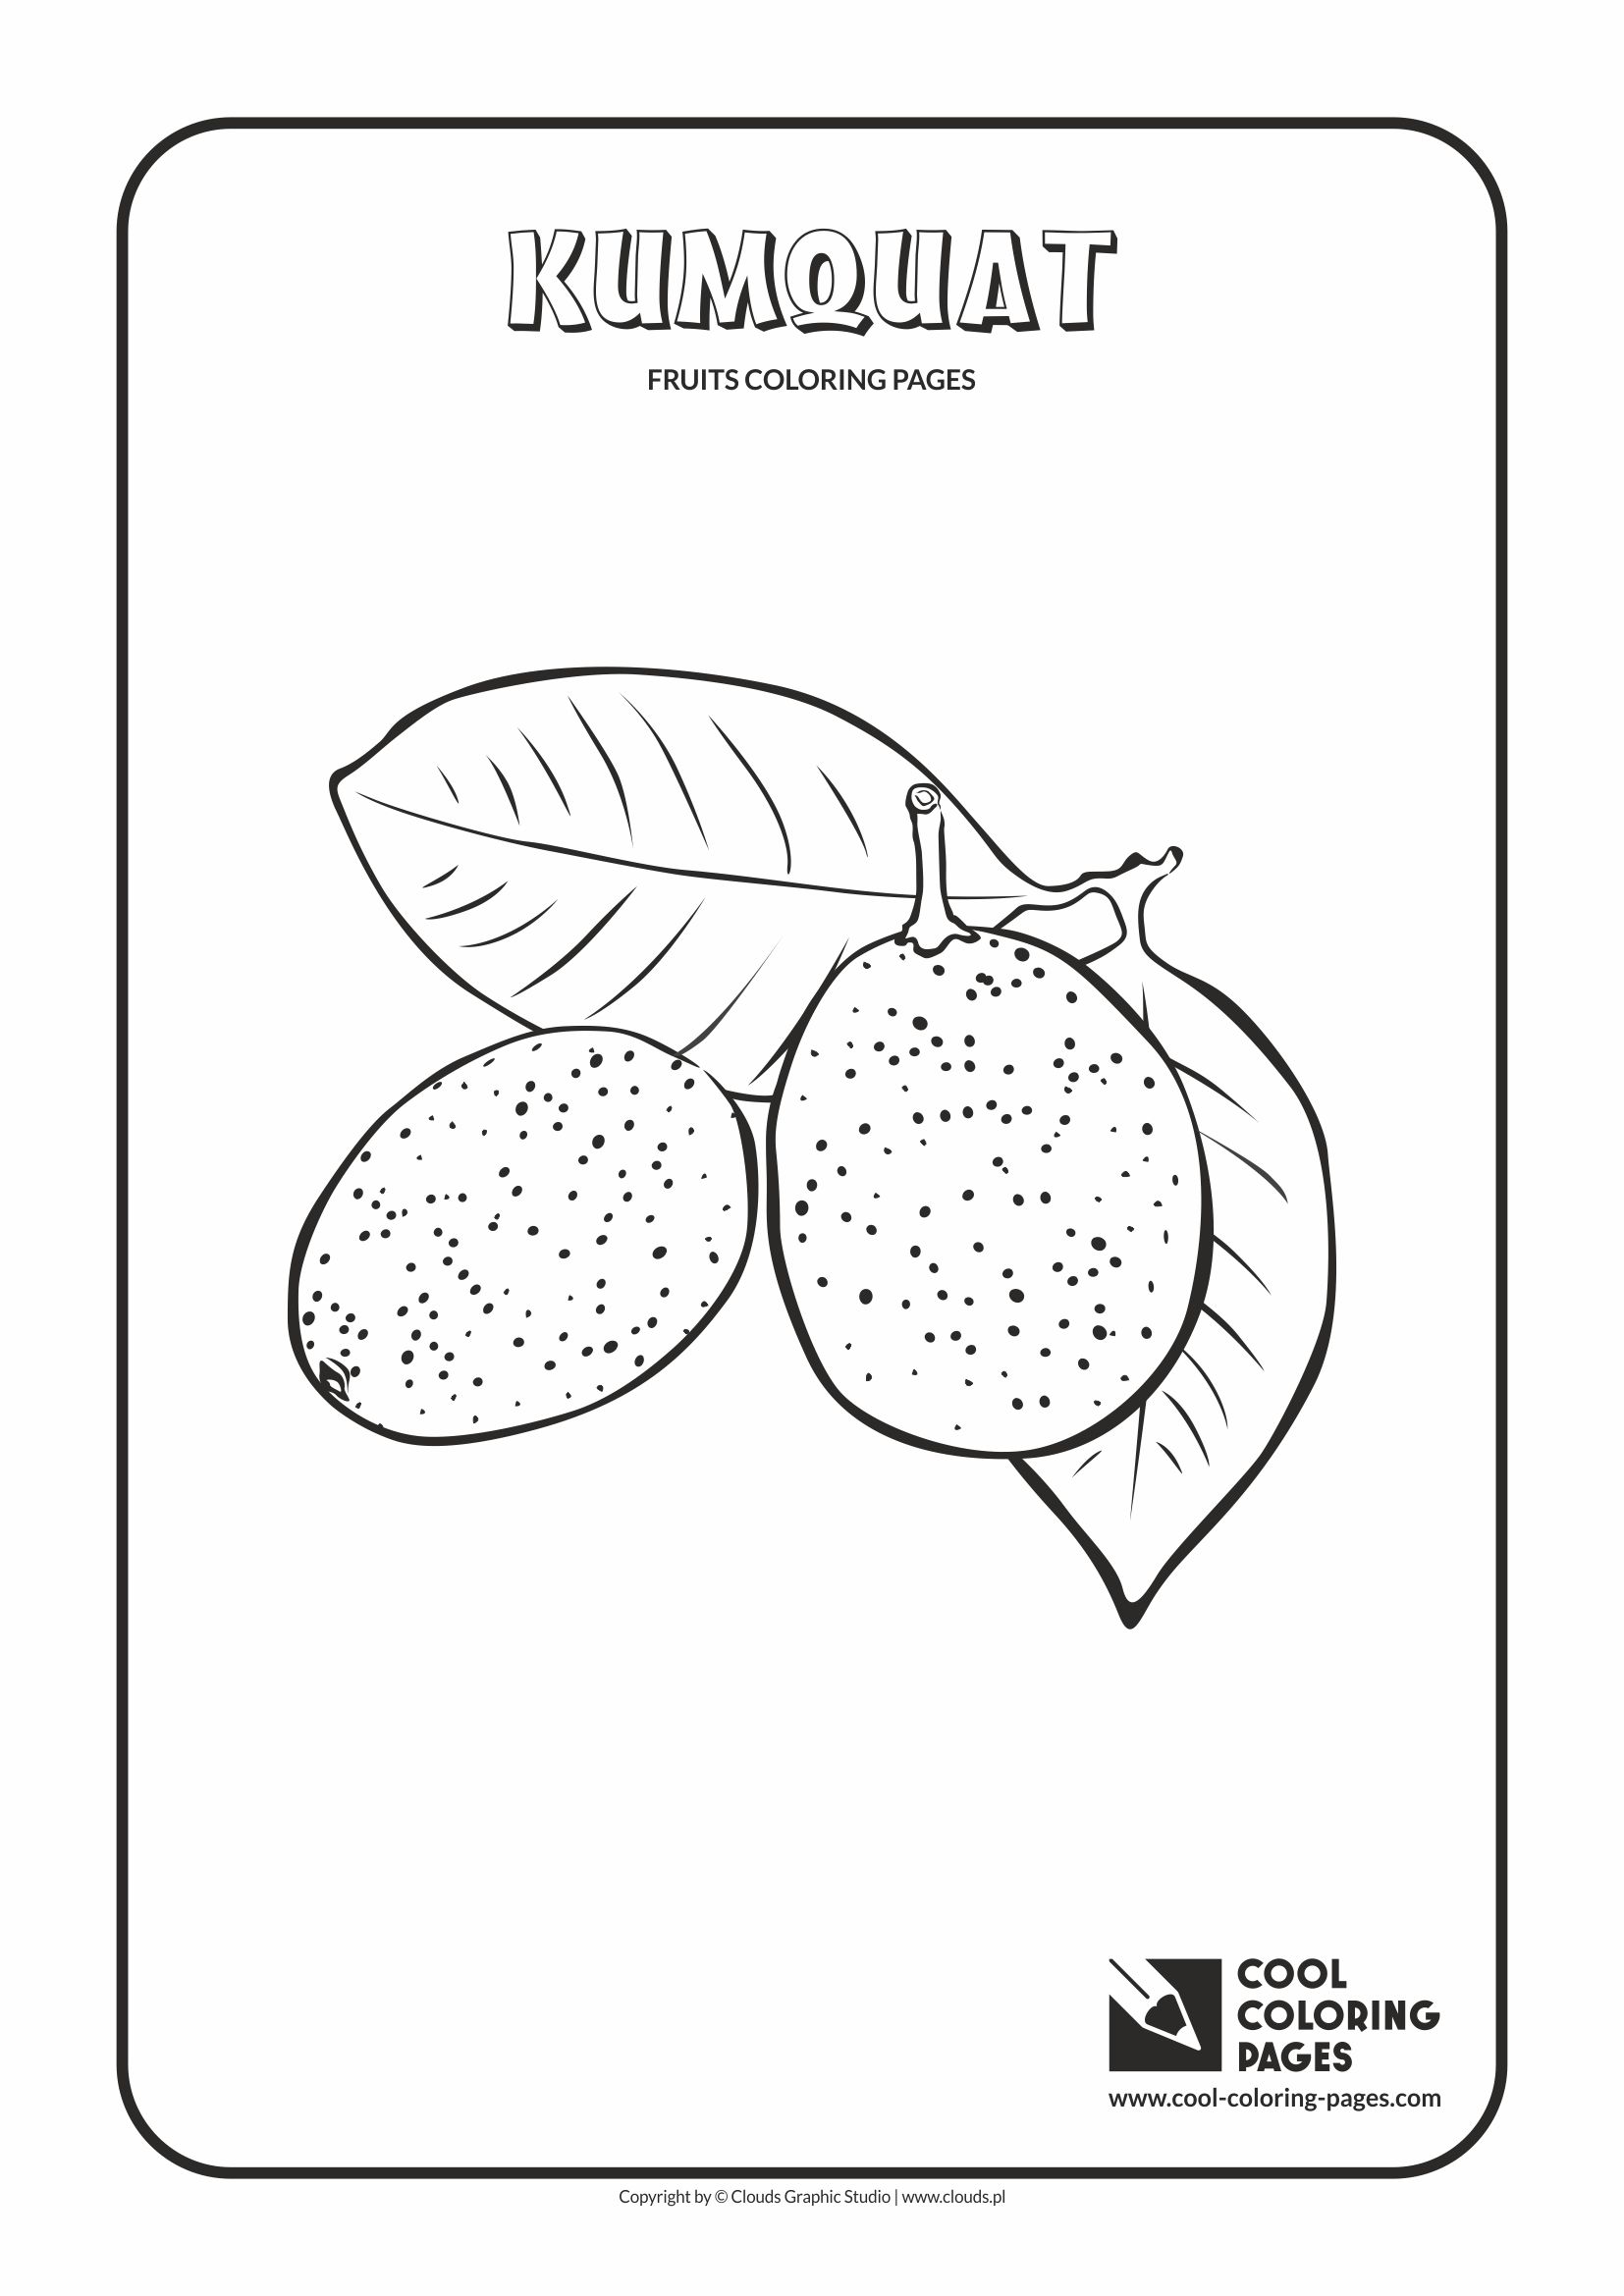 Cool Coloring Pages - Plants / Kumquat / Coloring page with kumquat